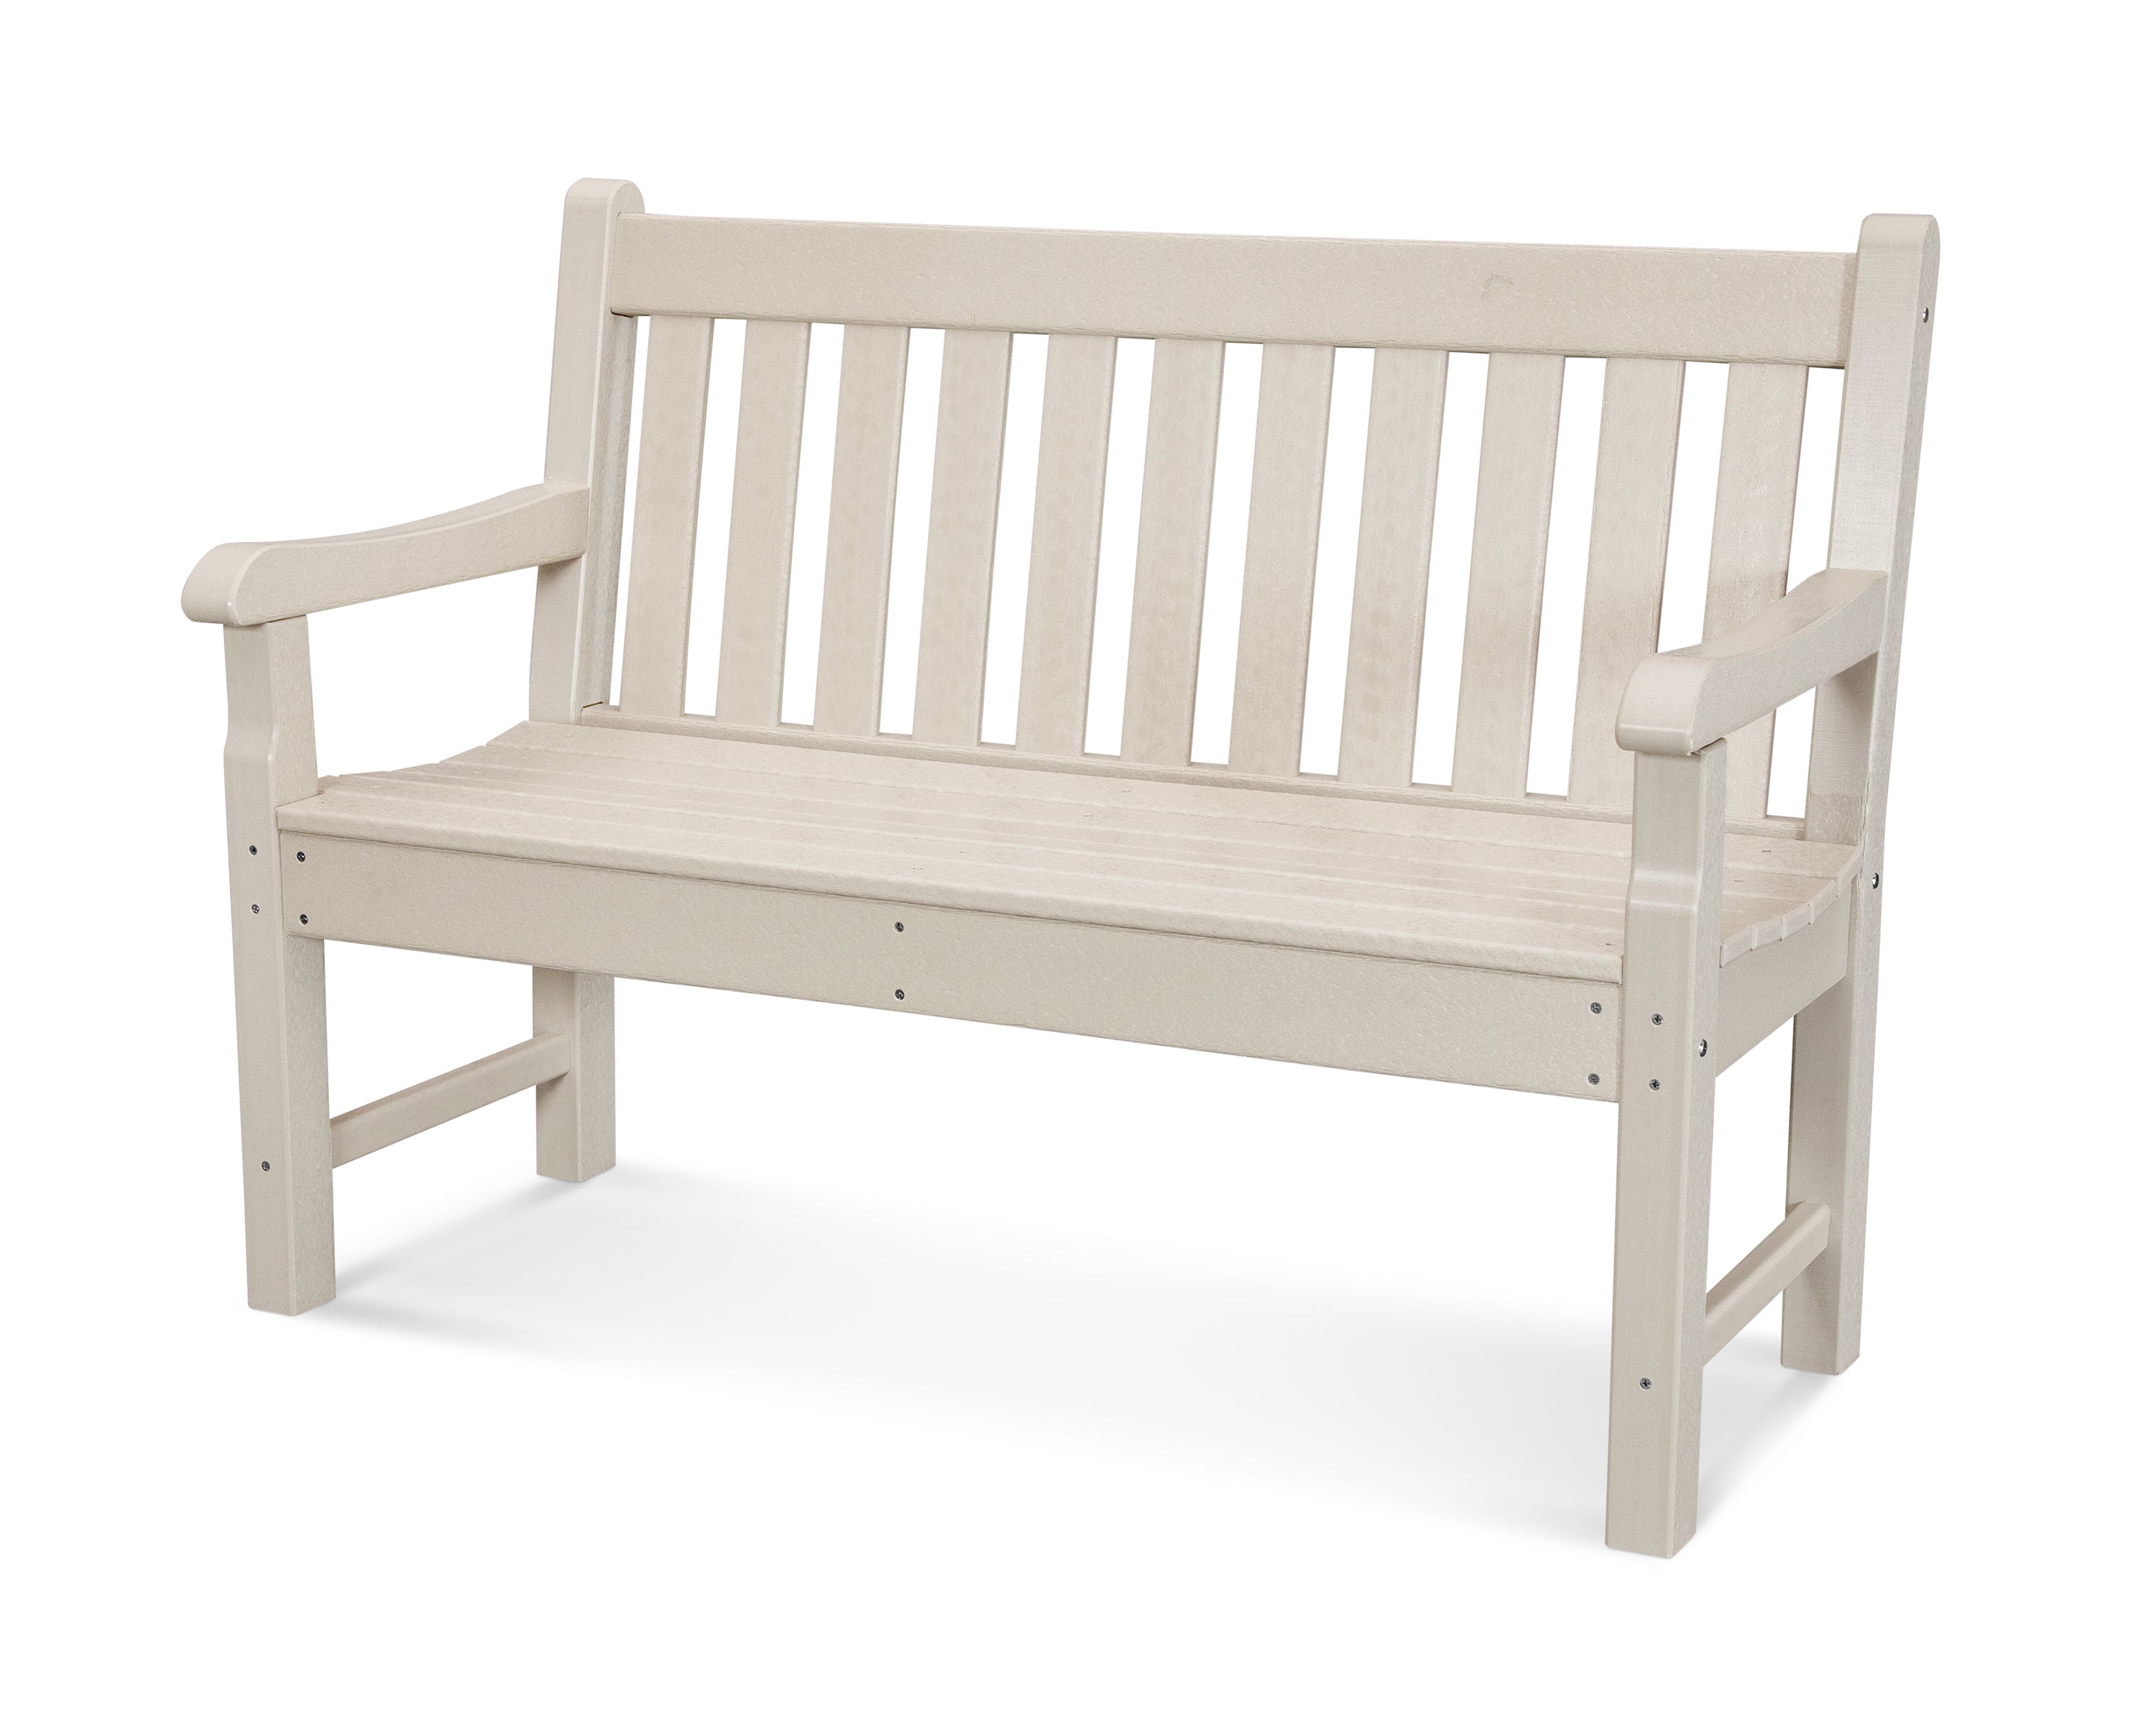 POLYWOOD® Rockford 48" Bench in Sand